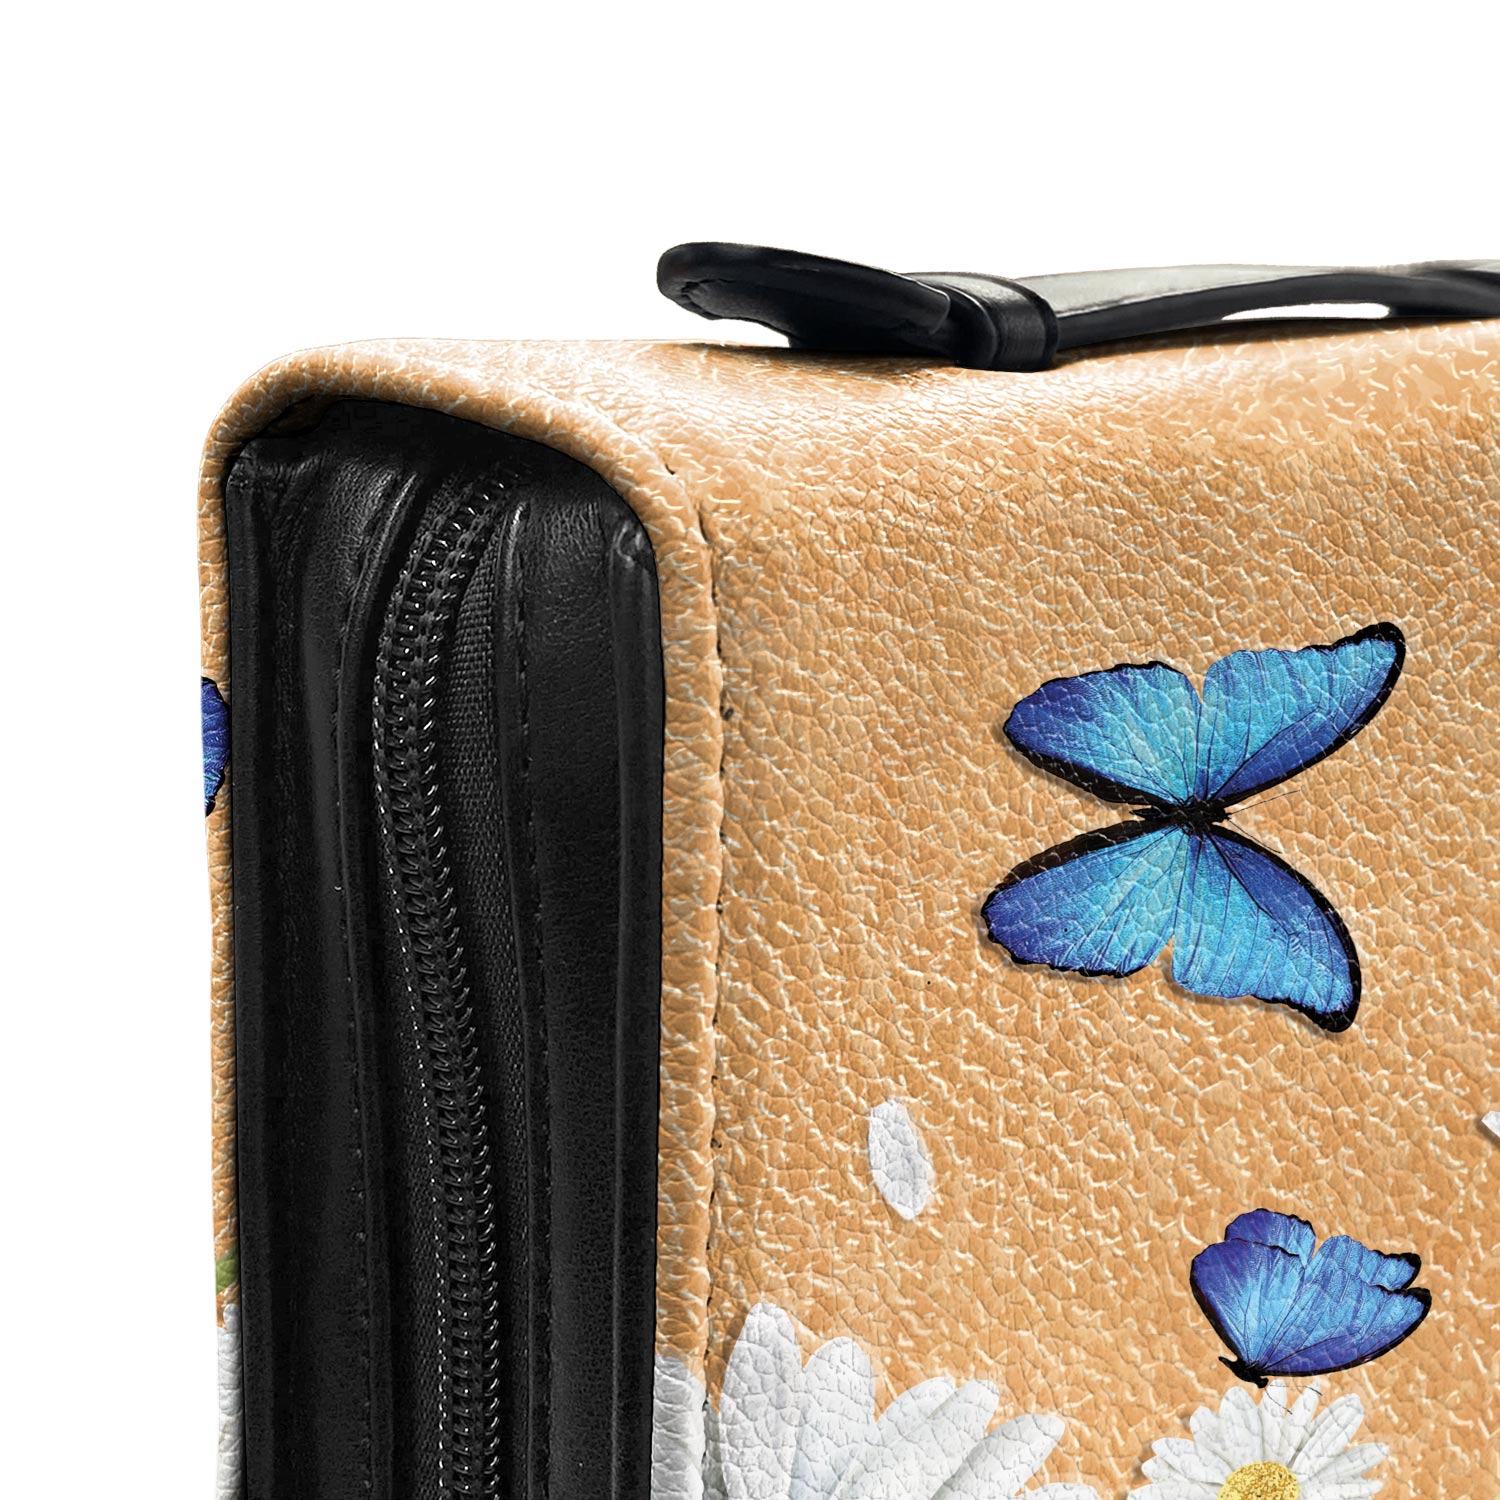 You Are Loved John 3 16 Butterfly Leather Style Personalized Bible Cover - Pastor's Bible Covers